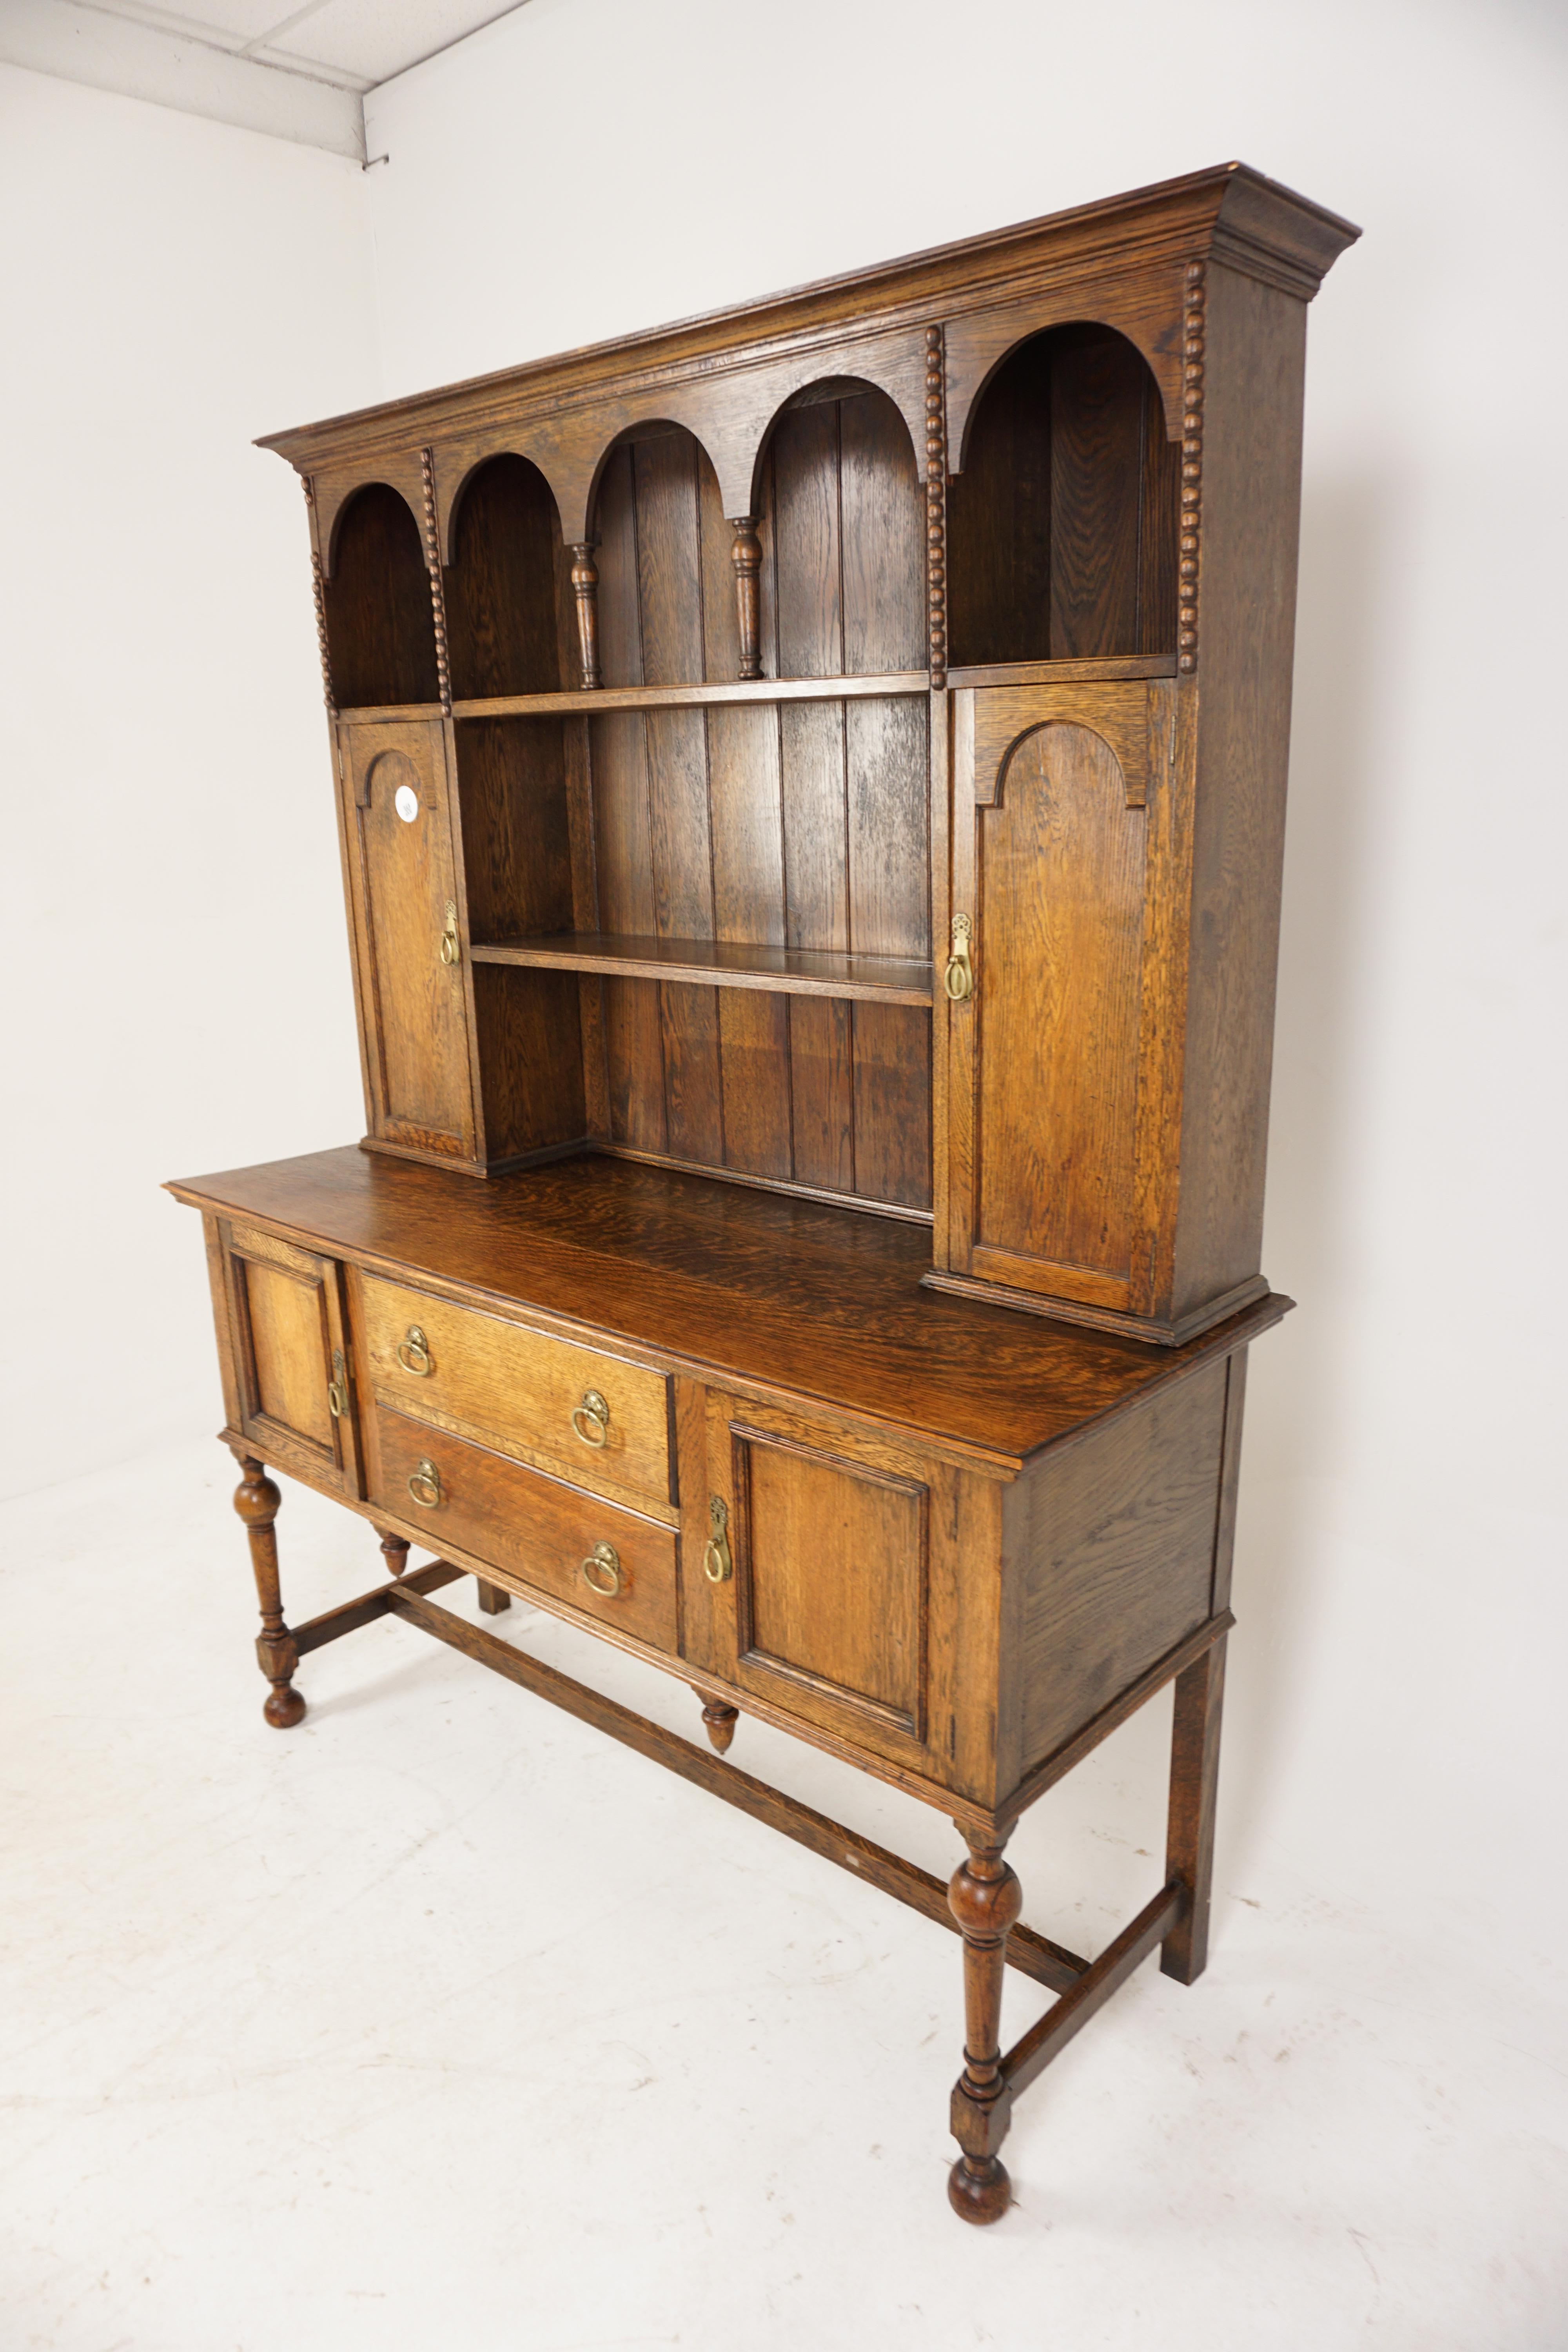 Antique Oak Dresser, Welsh Sideboard, Buffet and Hutch, Antique Furniture, Scotland 1900, H1040

+ Scotland 1900
+ Solid oak
+ Original finish
+ Shaped cornice
+ Five shaped front cupboards on top
+ Pair of parallel cupboard doors
+ Single